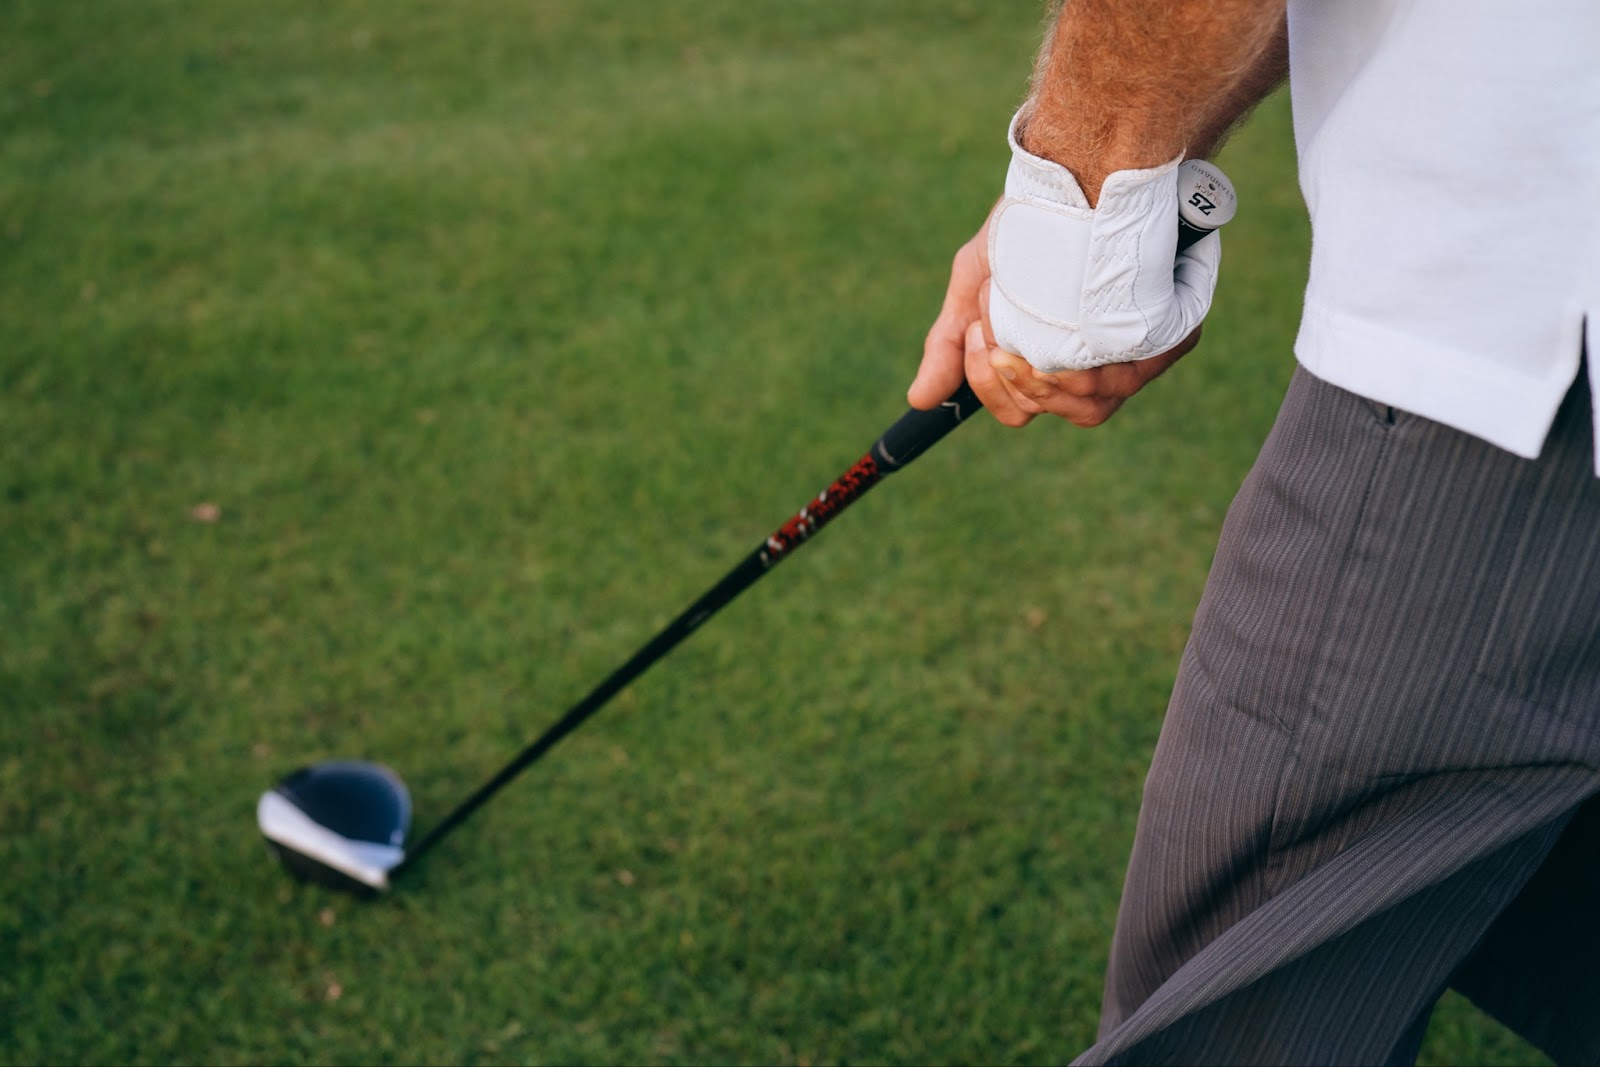 Left Handed Golfer's Grip: Tips on Grips from a Lefty's Perspective - Gears  Sports